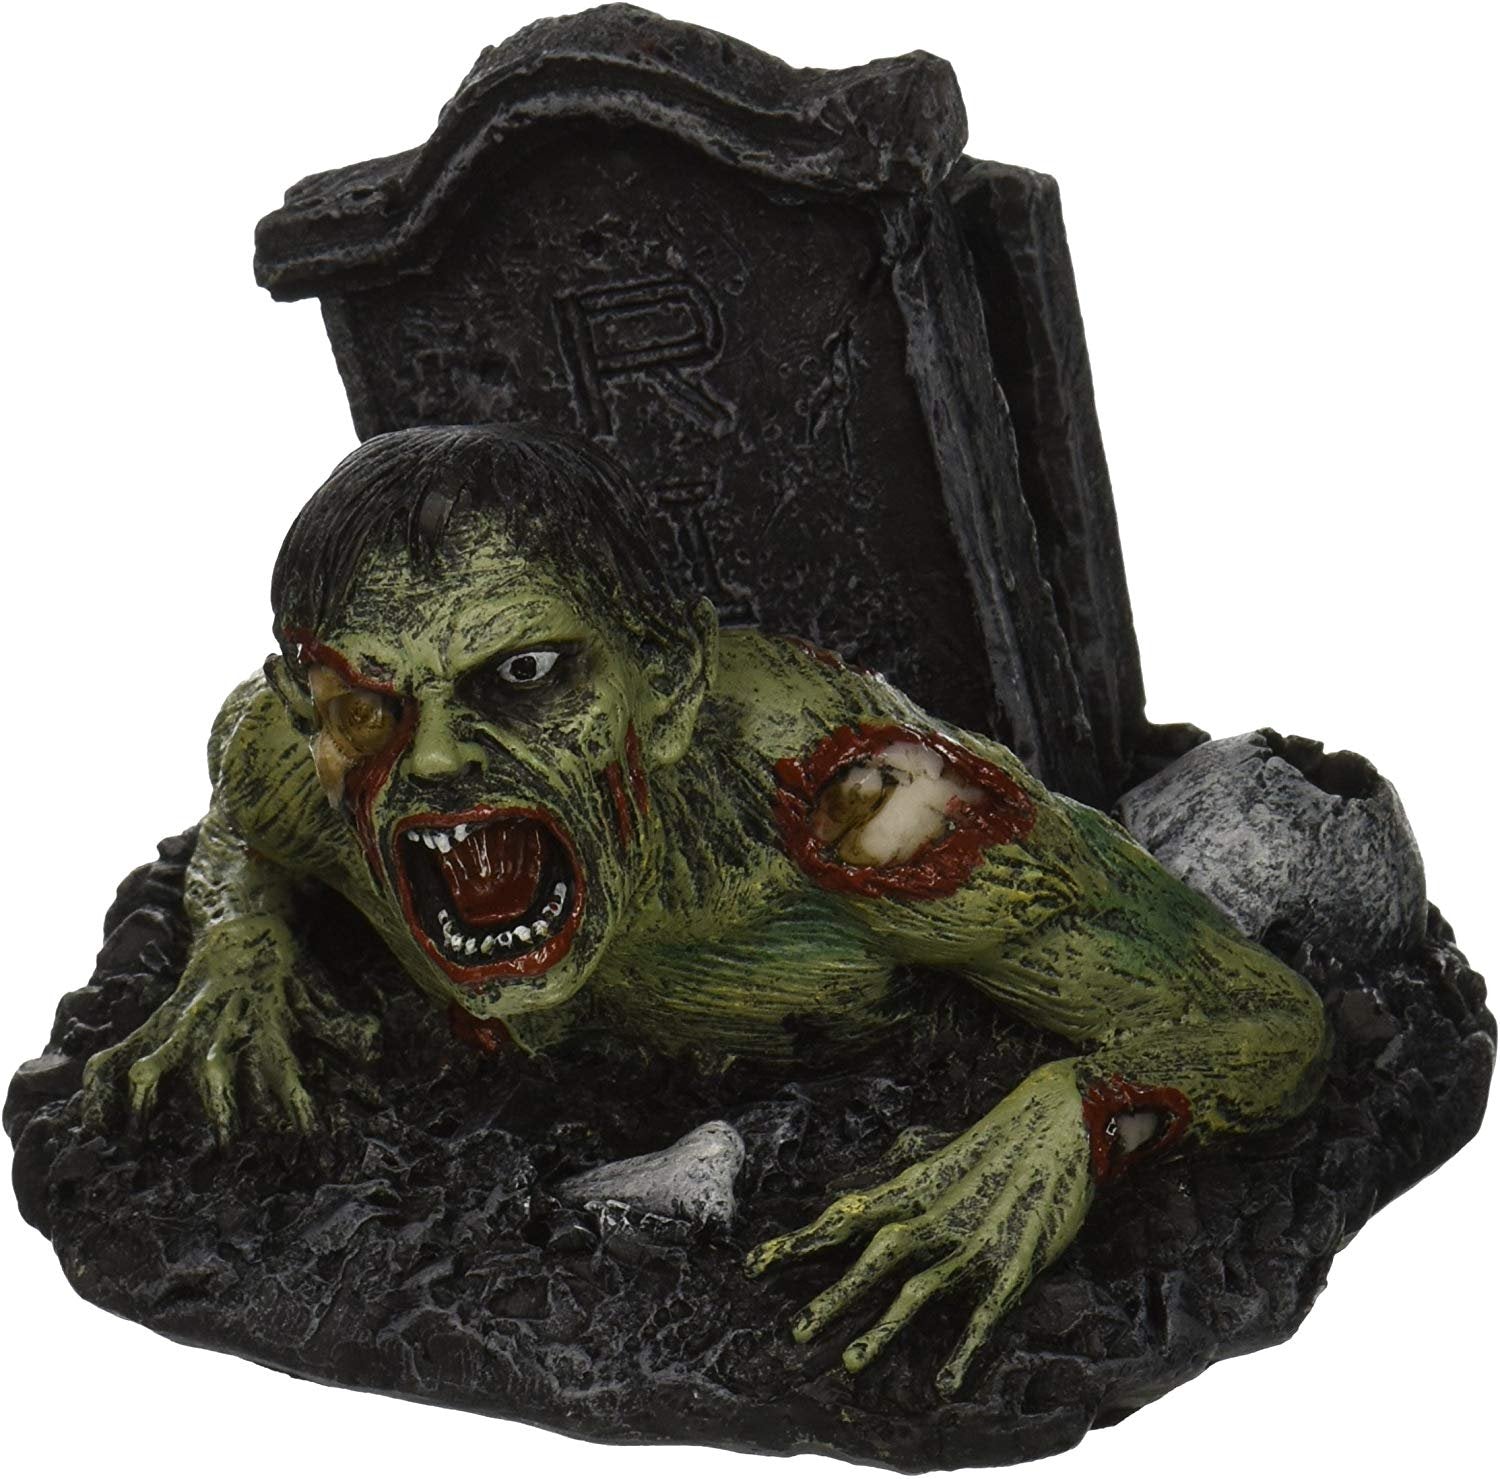 PTC 9602 Zombie Hand Painted Cold Cast Resin Name Card Holder, 4.06", Multicolor